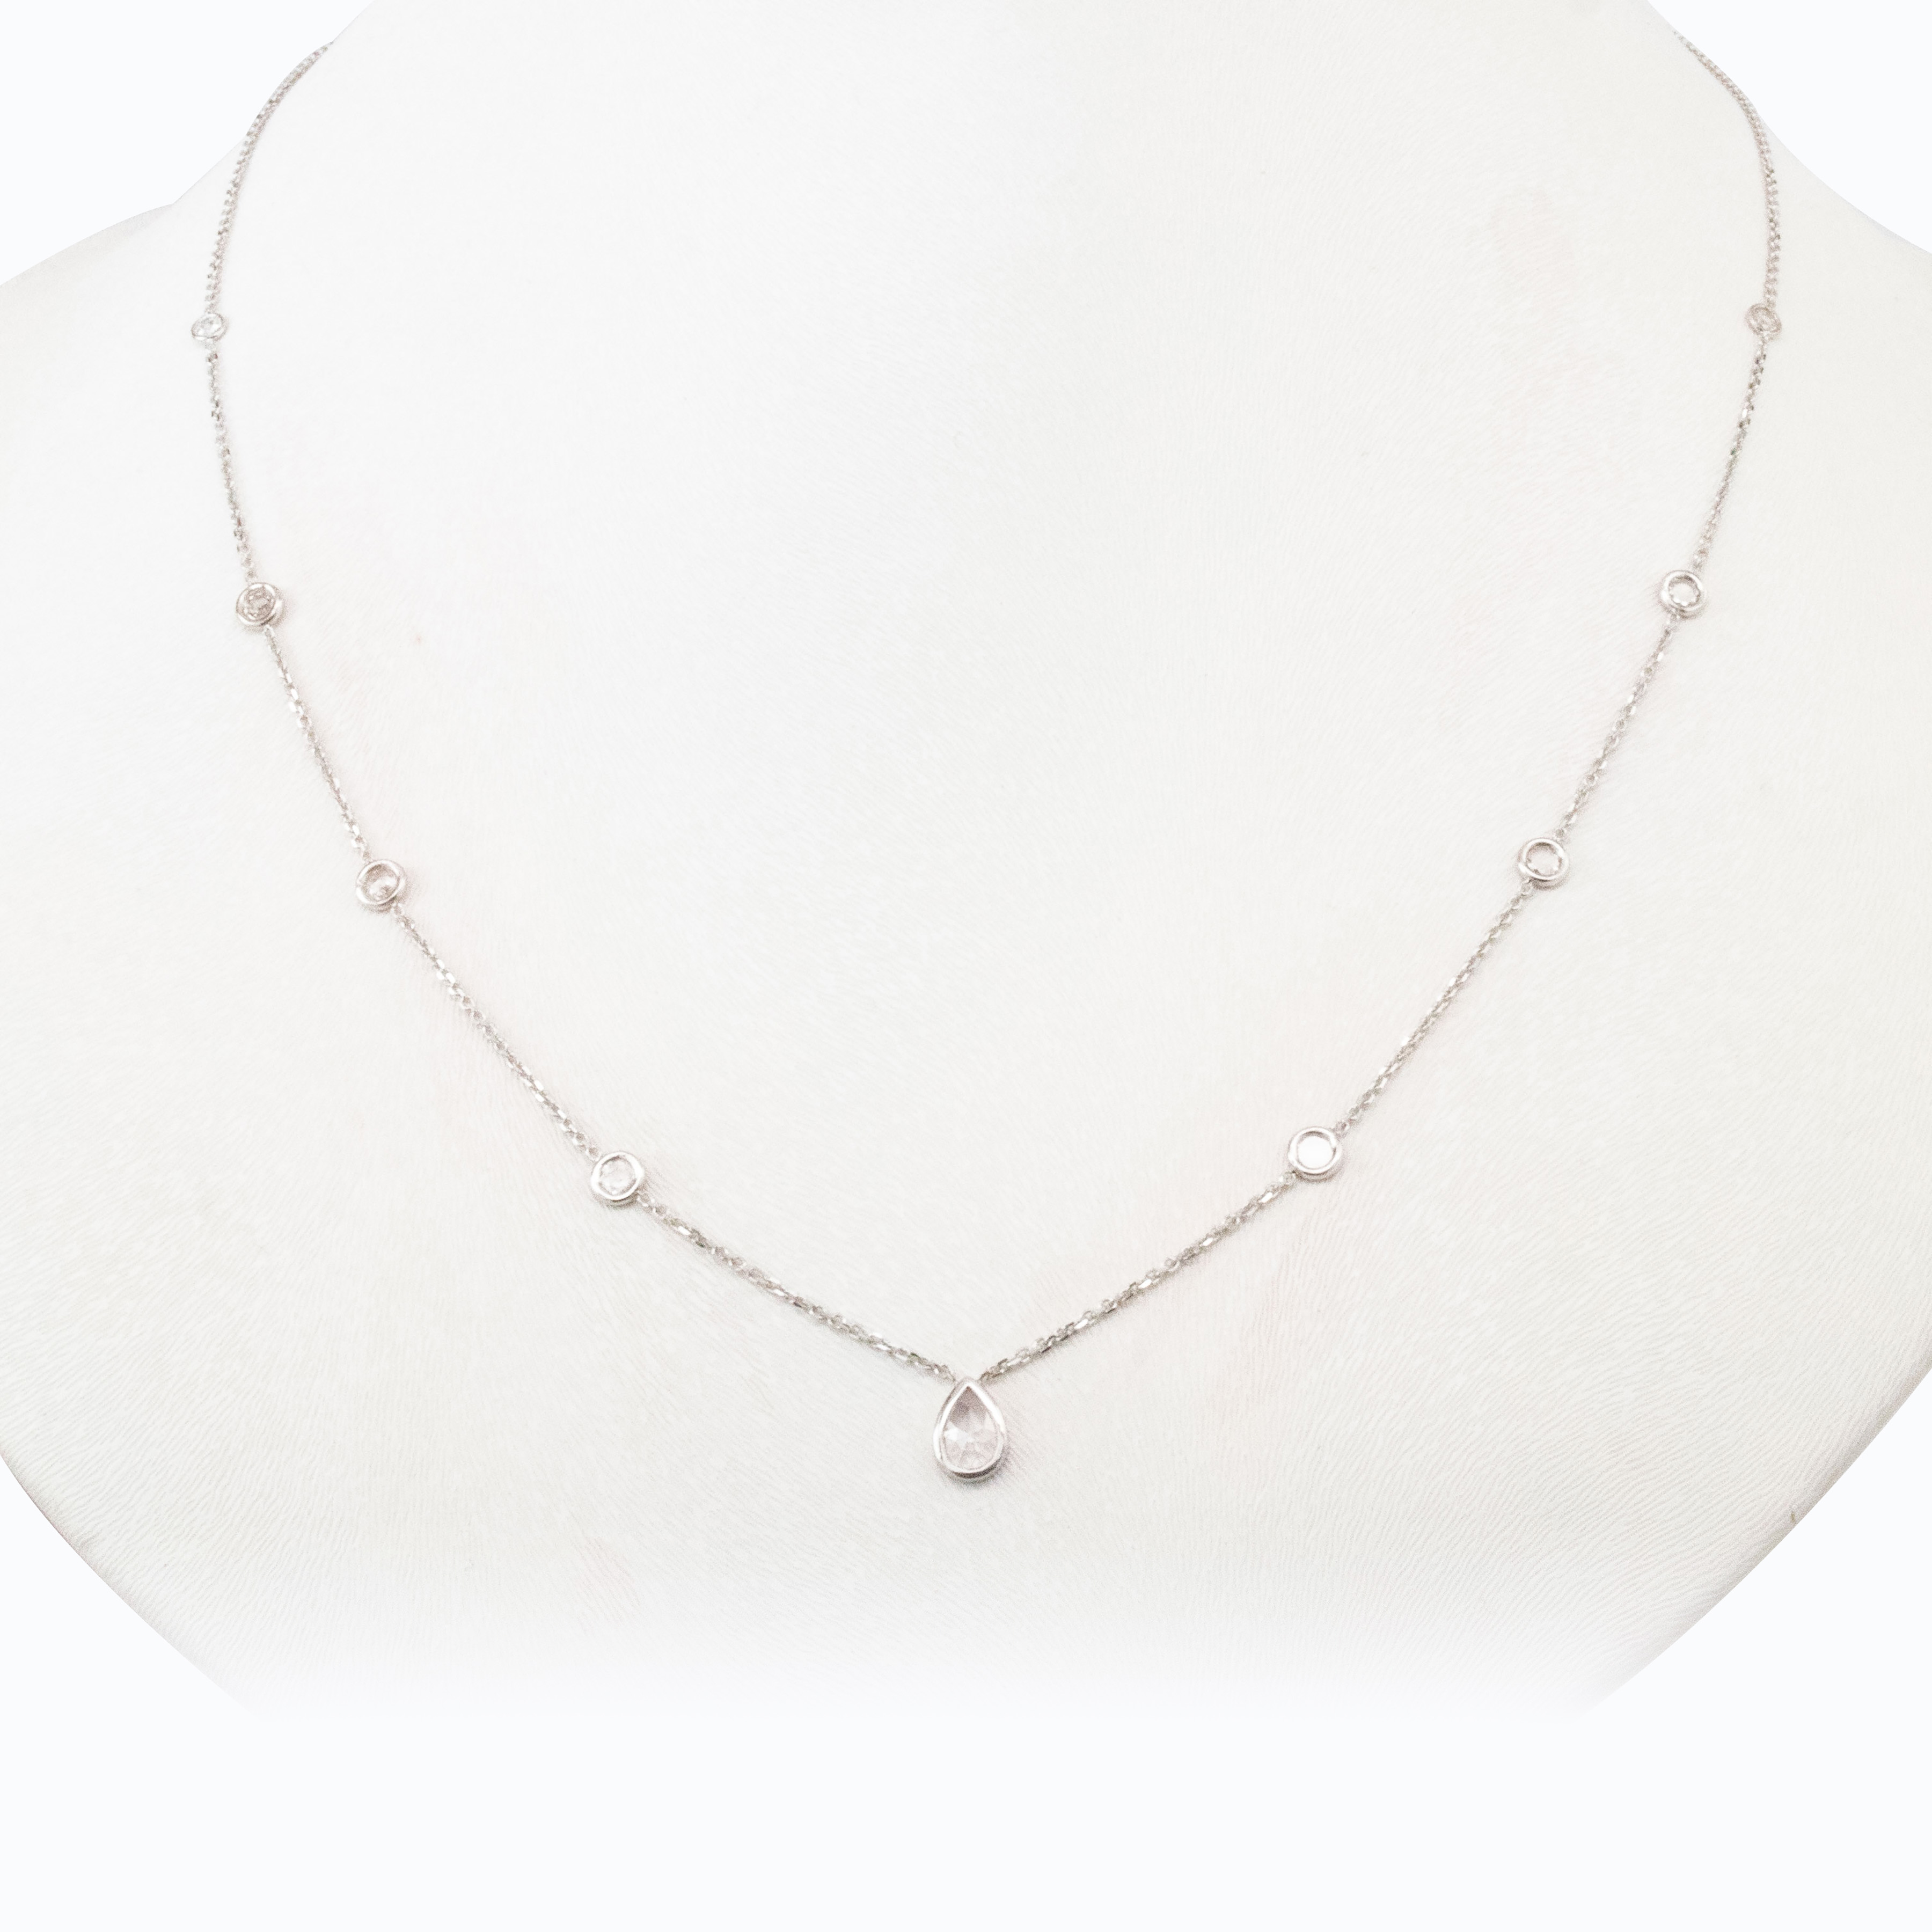 Diamonds by the Yard Necklace, 14k White Gold